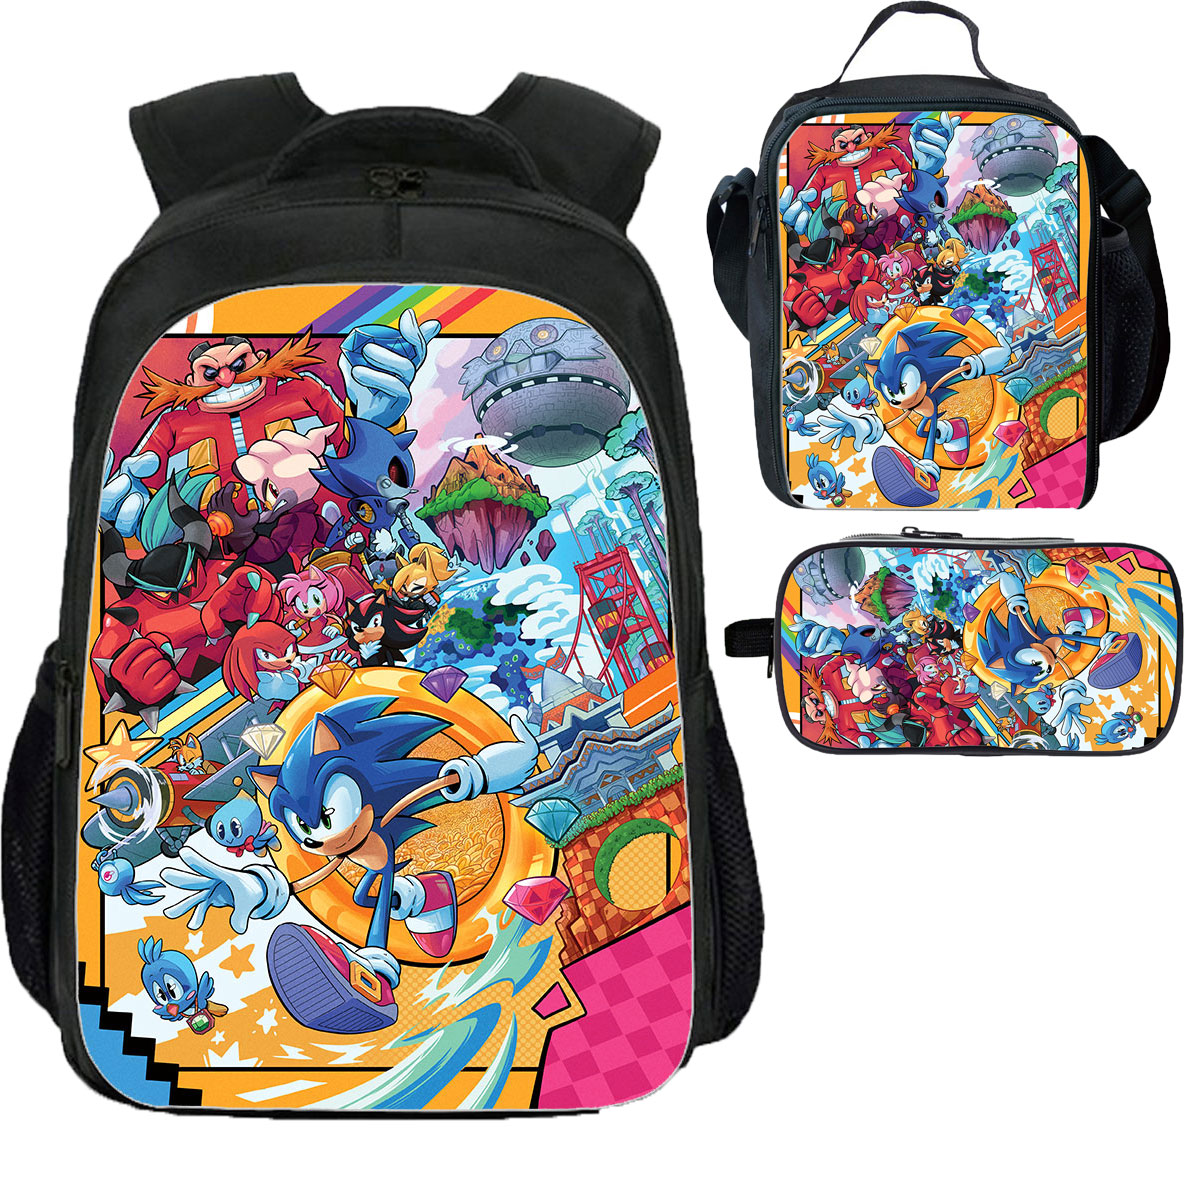 Sonic School Backpack Lunch Bag Pencil Case 3 Pieces 